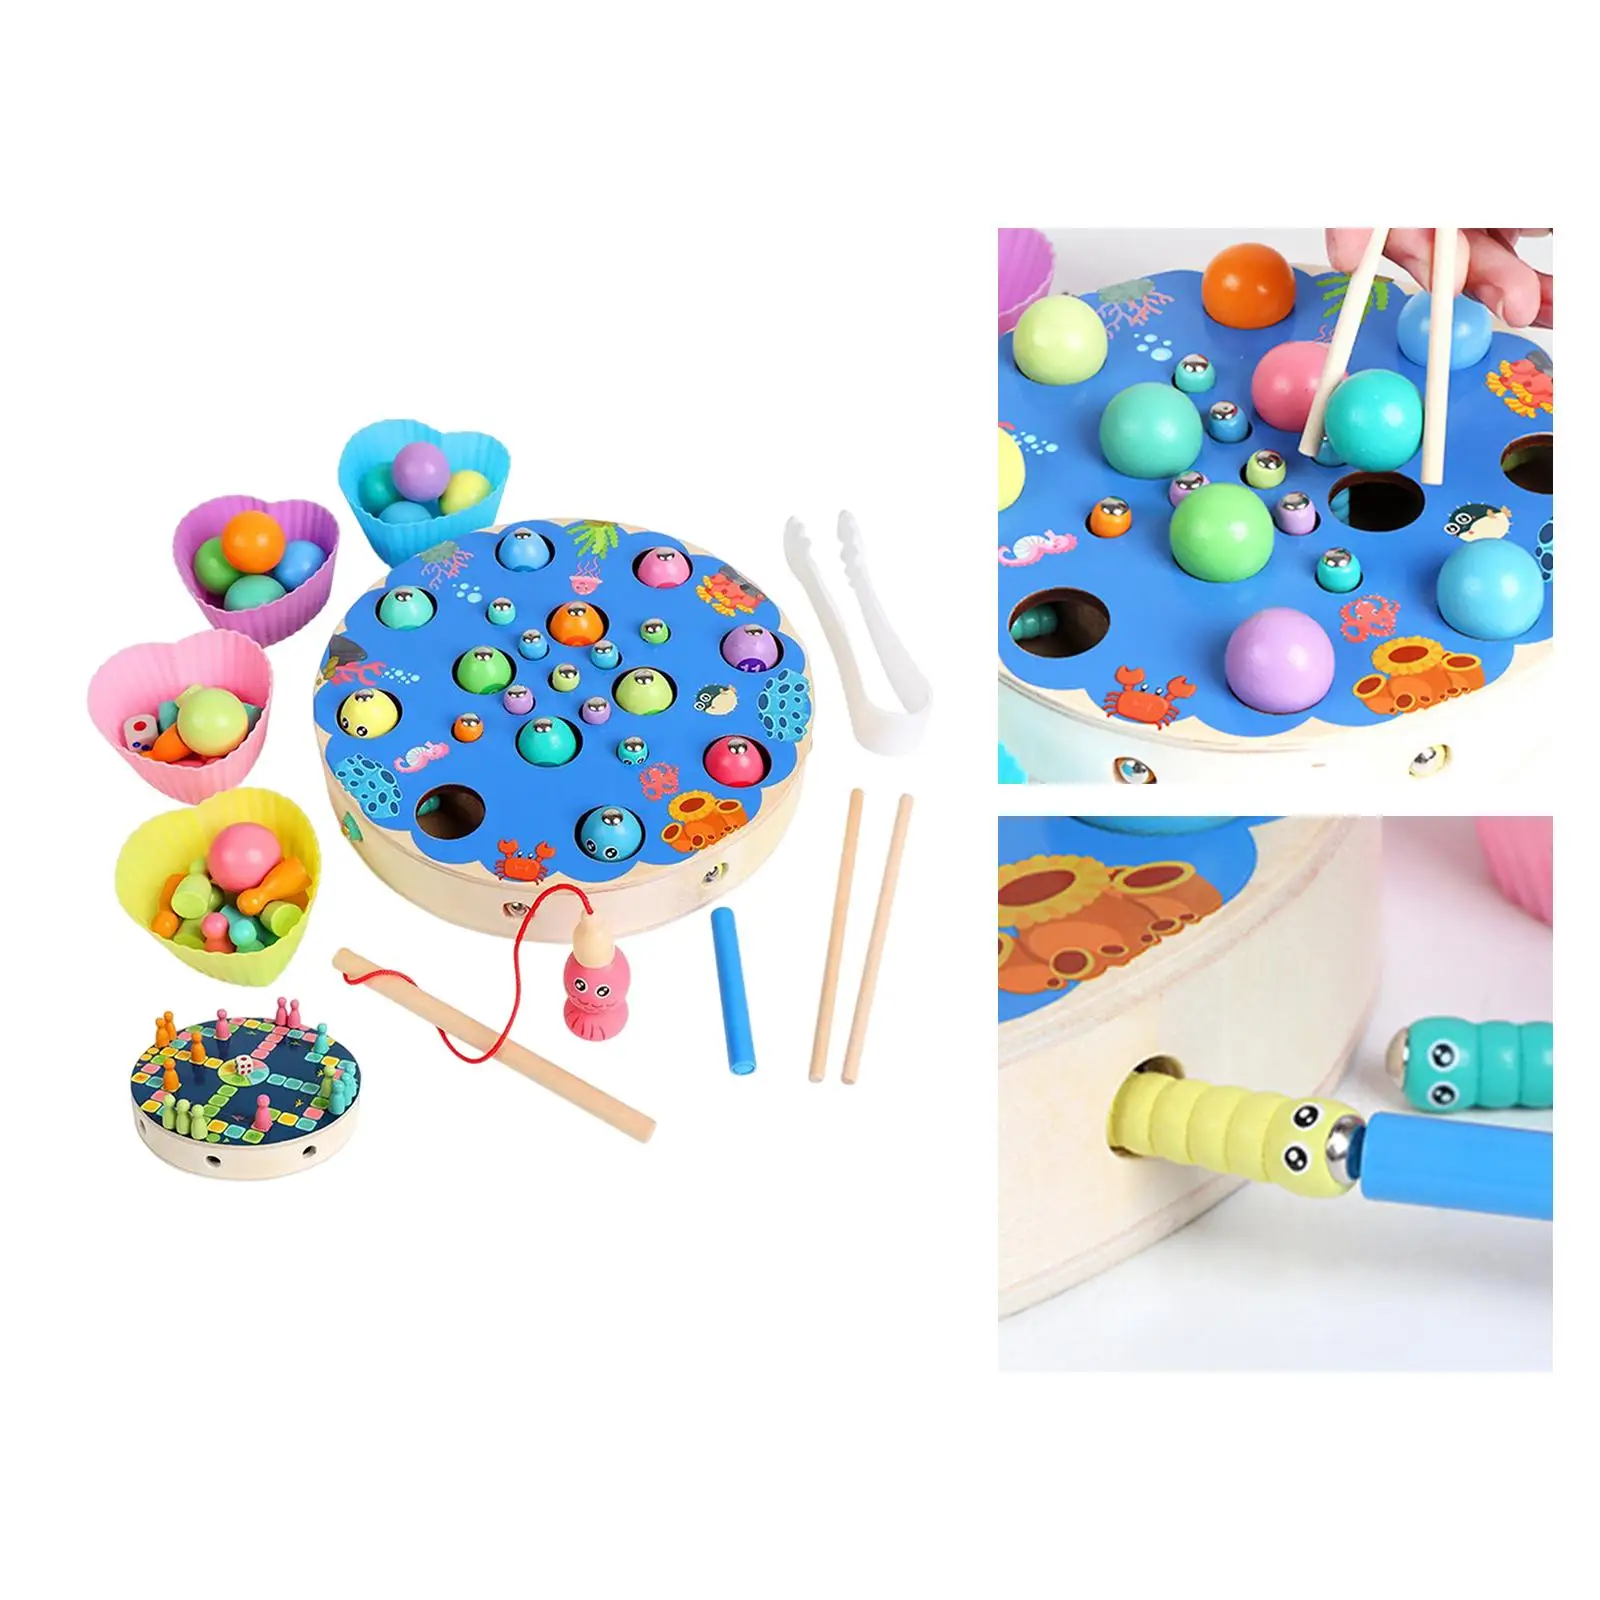 Multicolor Montessori Toys Clamp Color Recognition Educational Chopsticks Wooden Fishing Game for Game Indoor Outdoor Gift